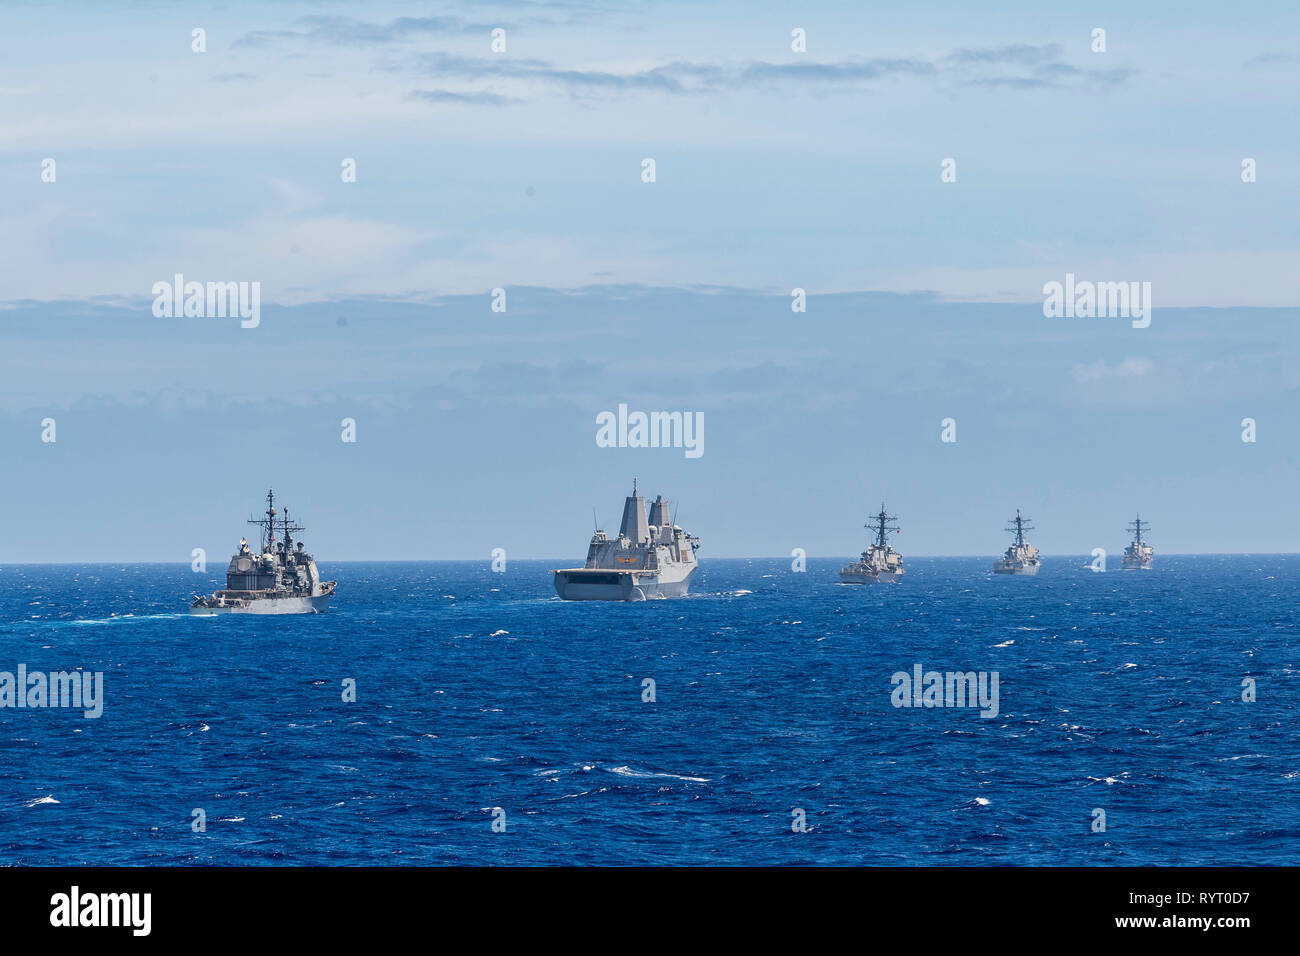 190314-N-WI365-1153 PACIFIC OCEAN (March 14, 2019) – The amphibious dock landing ship USS Ashland (LSD 48) sails behind a formation during a training exercise with other U.S. Navy warships. U.S. Navy warships train together to increase the tactical proficiency, lethality, and interoperability of participating units in an Era of Great Power Competition. (U.S. Navy photo by Mass Communication Specialist 2nd Class Markus Castaneda) Stock Photo